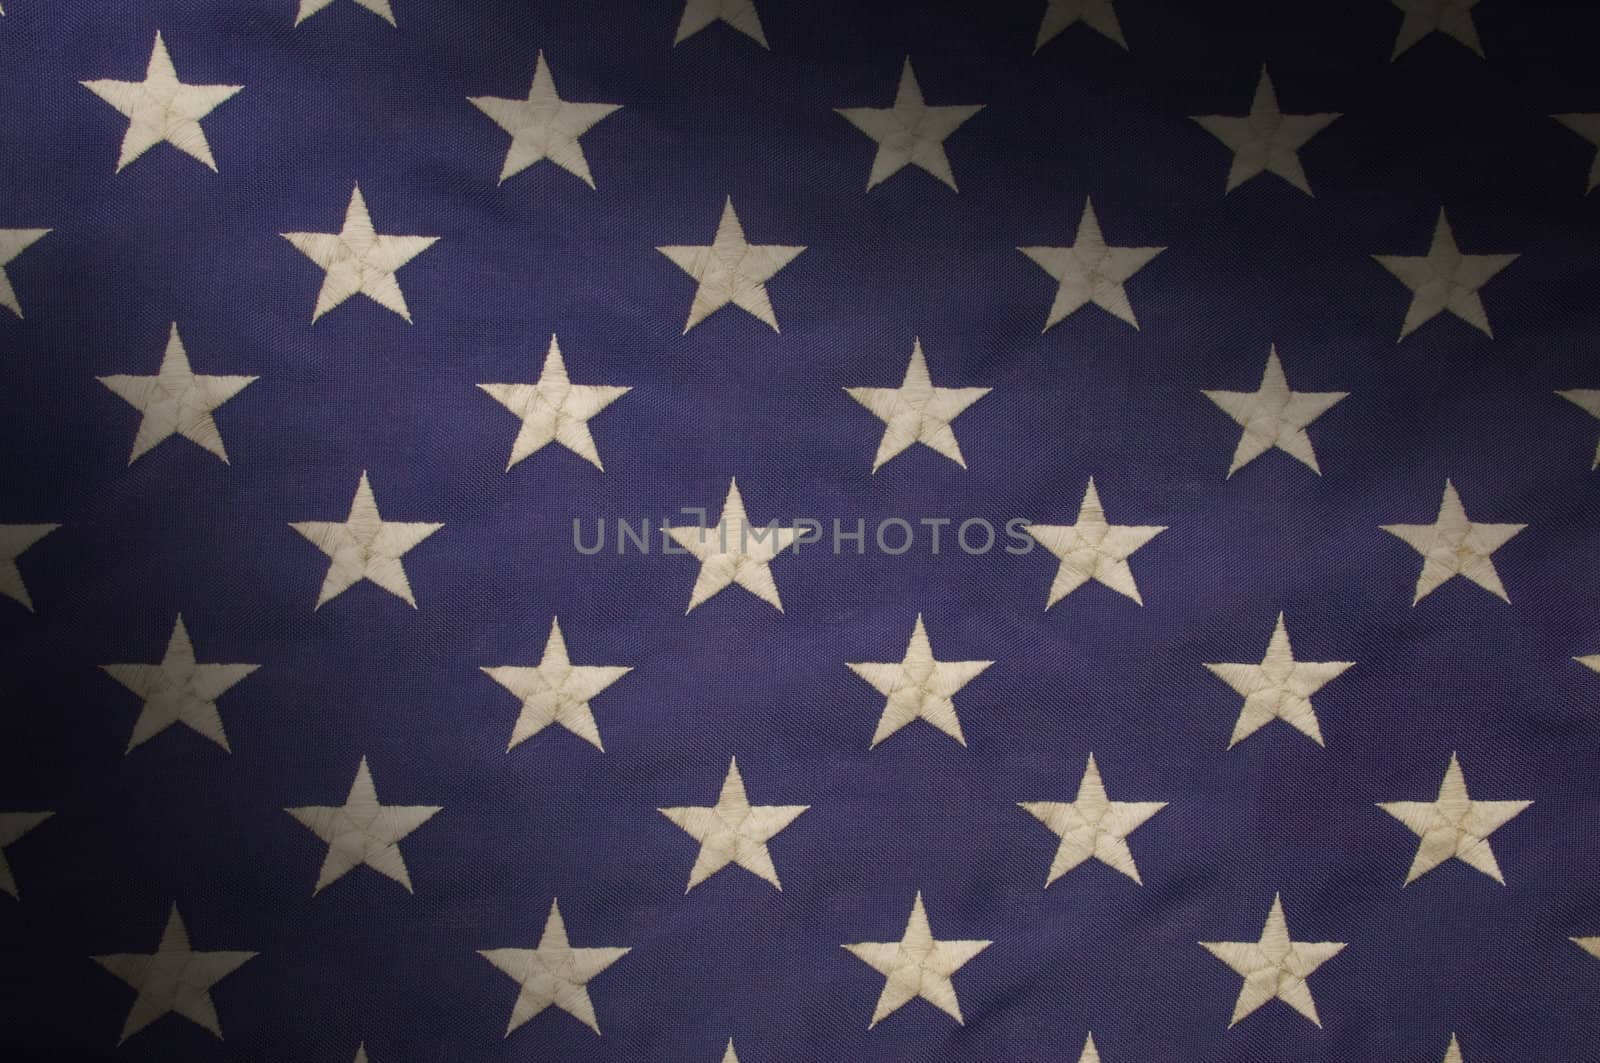 Embroidered white stars on a field of blue which represents the union on the American flag, lit diagonally